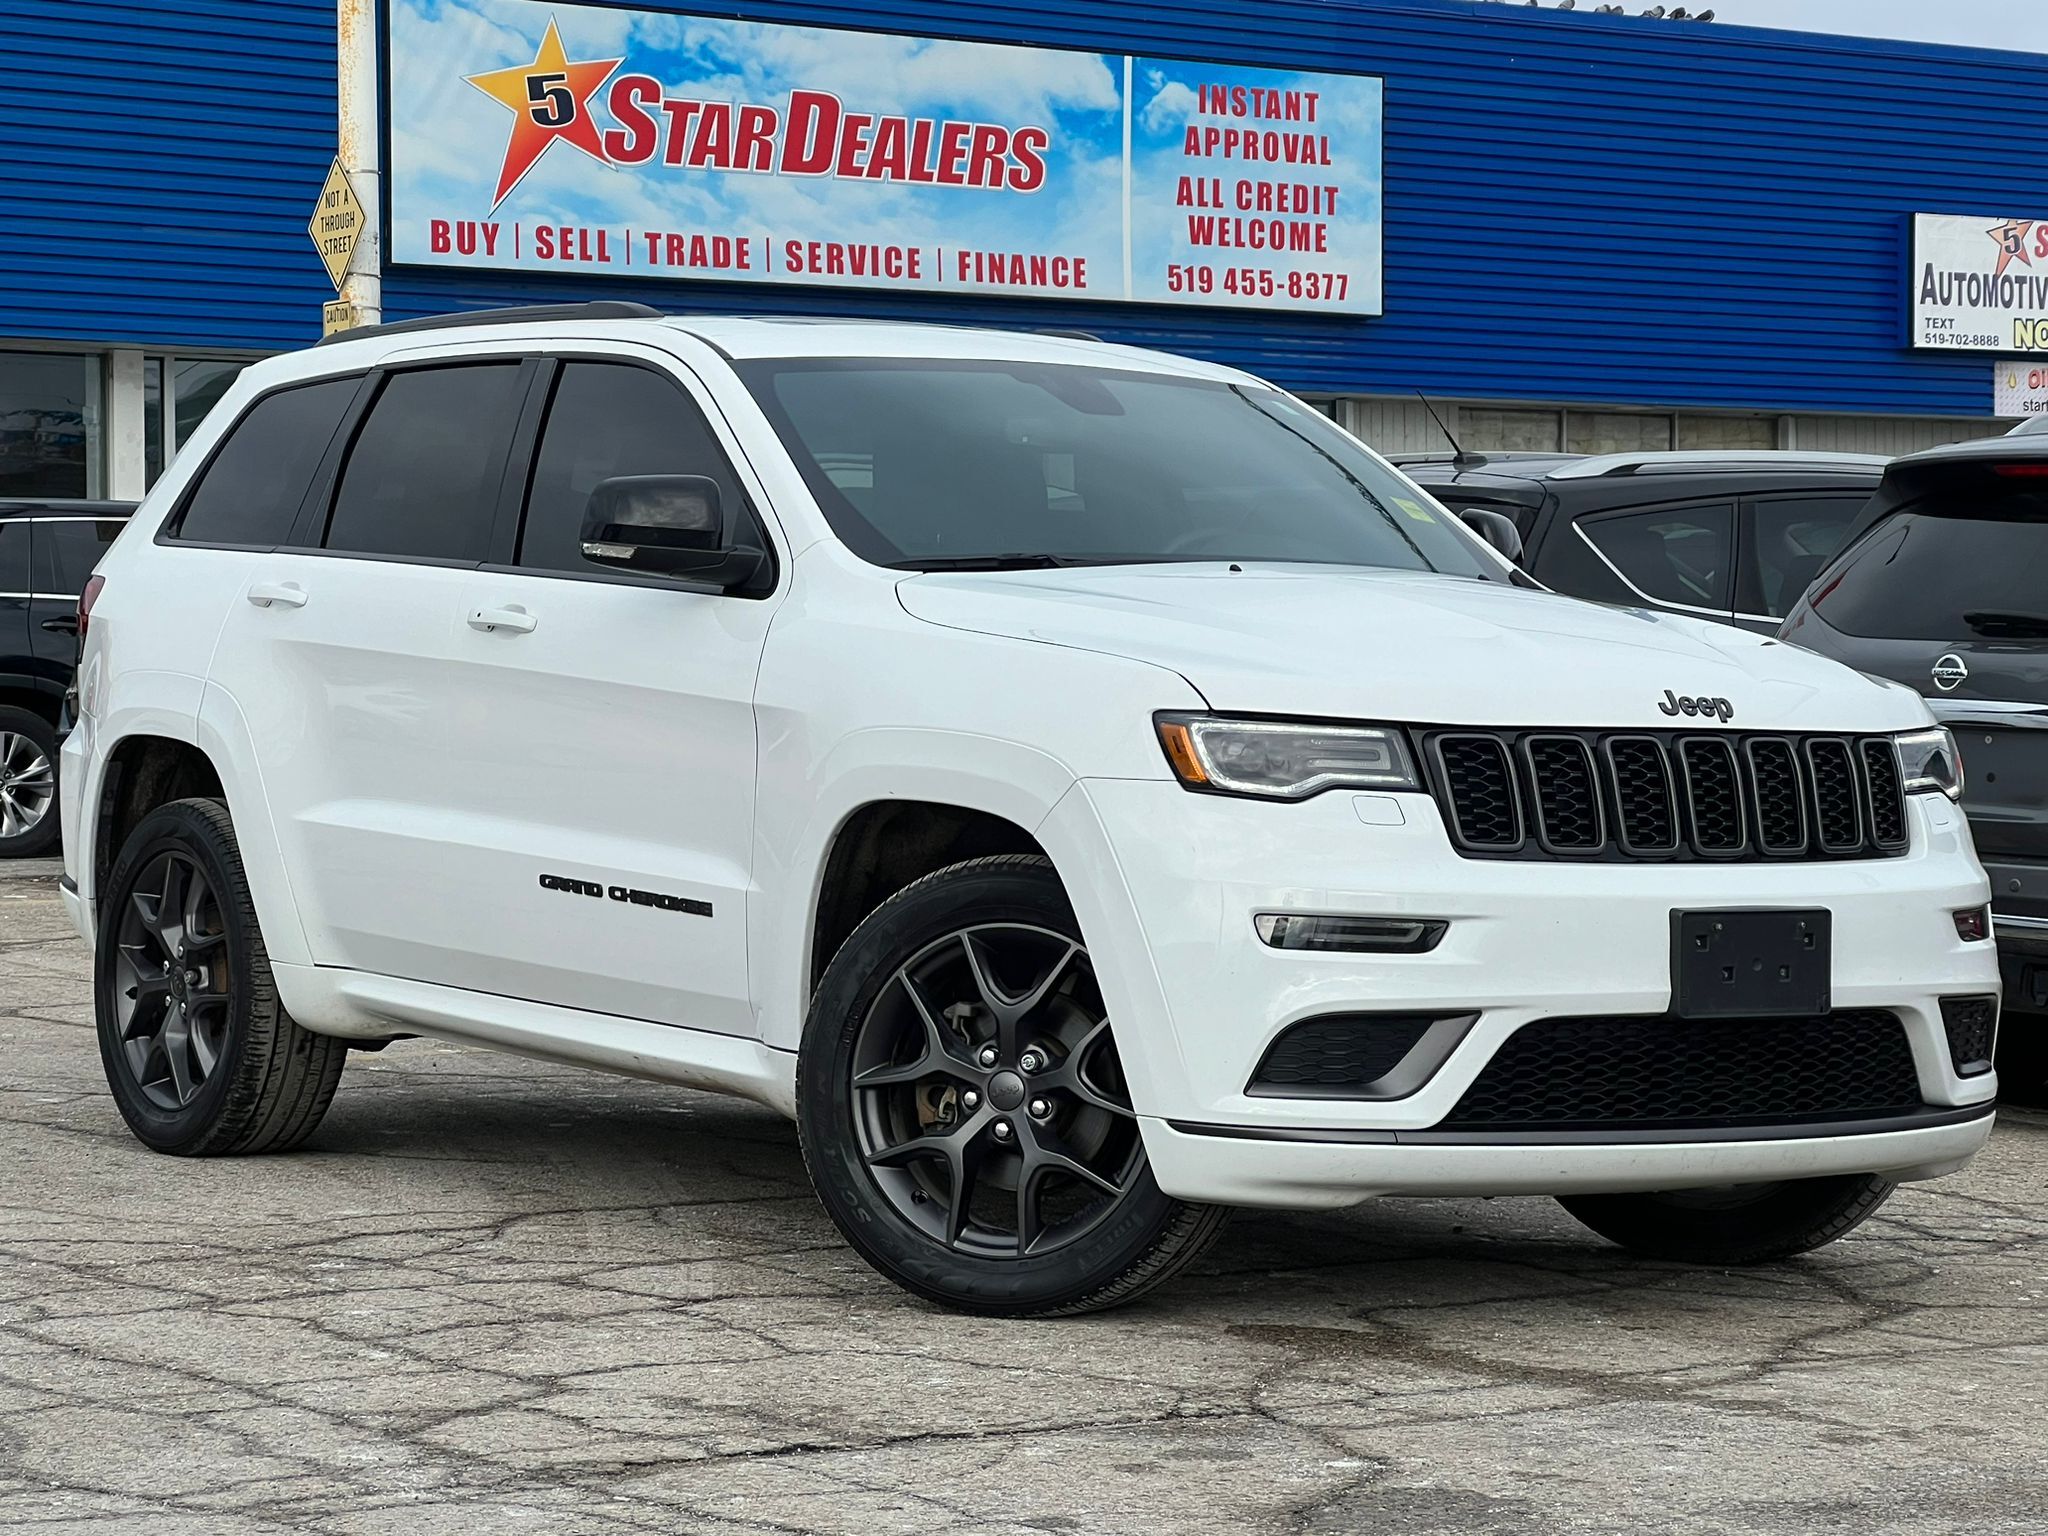 2019 Jeep Grand Cherokee NAV LEATHER PANO ROOF MINT! WE FINANCE ALL CREDIT!